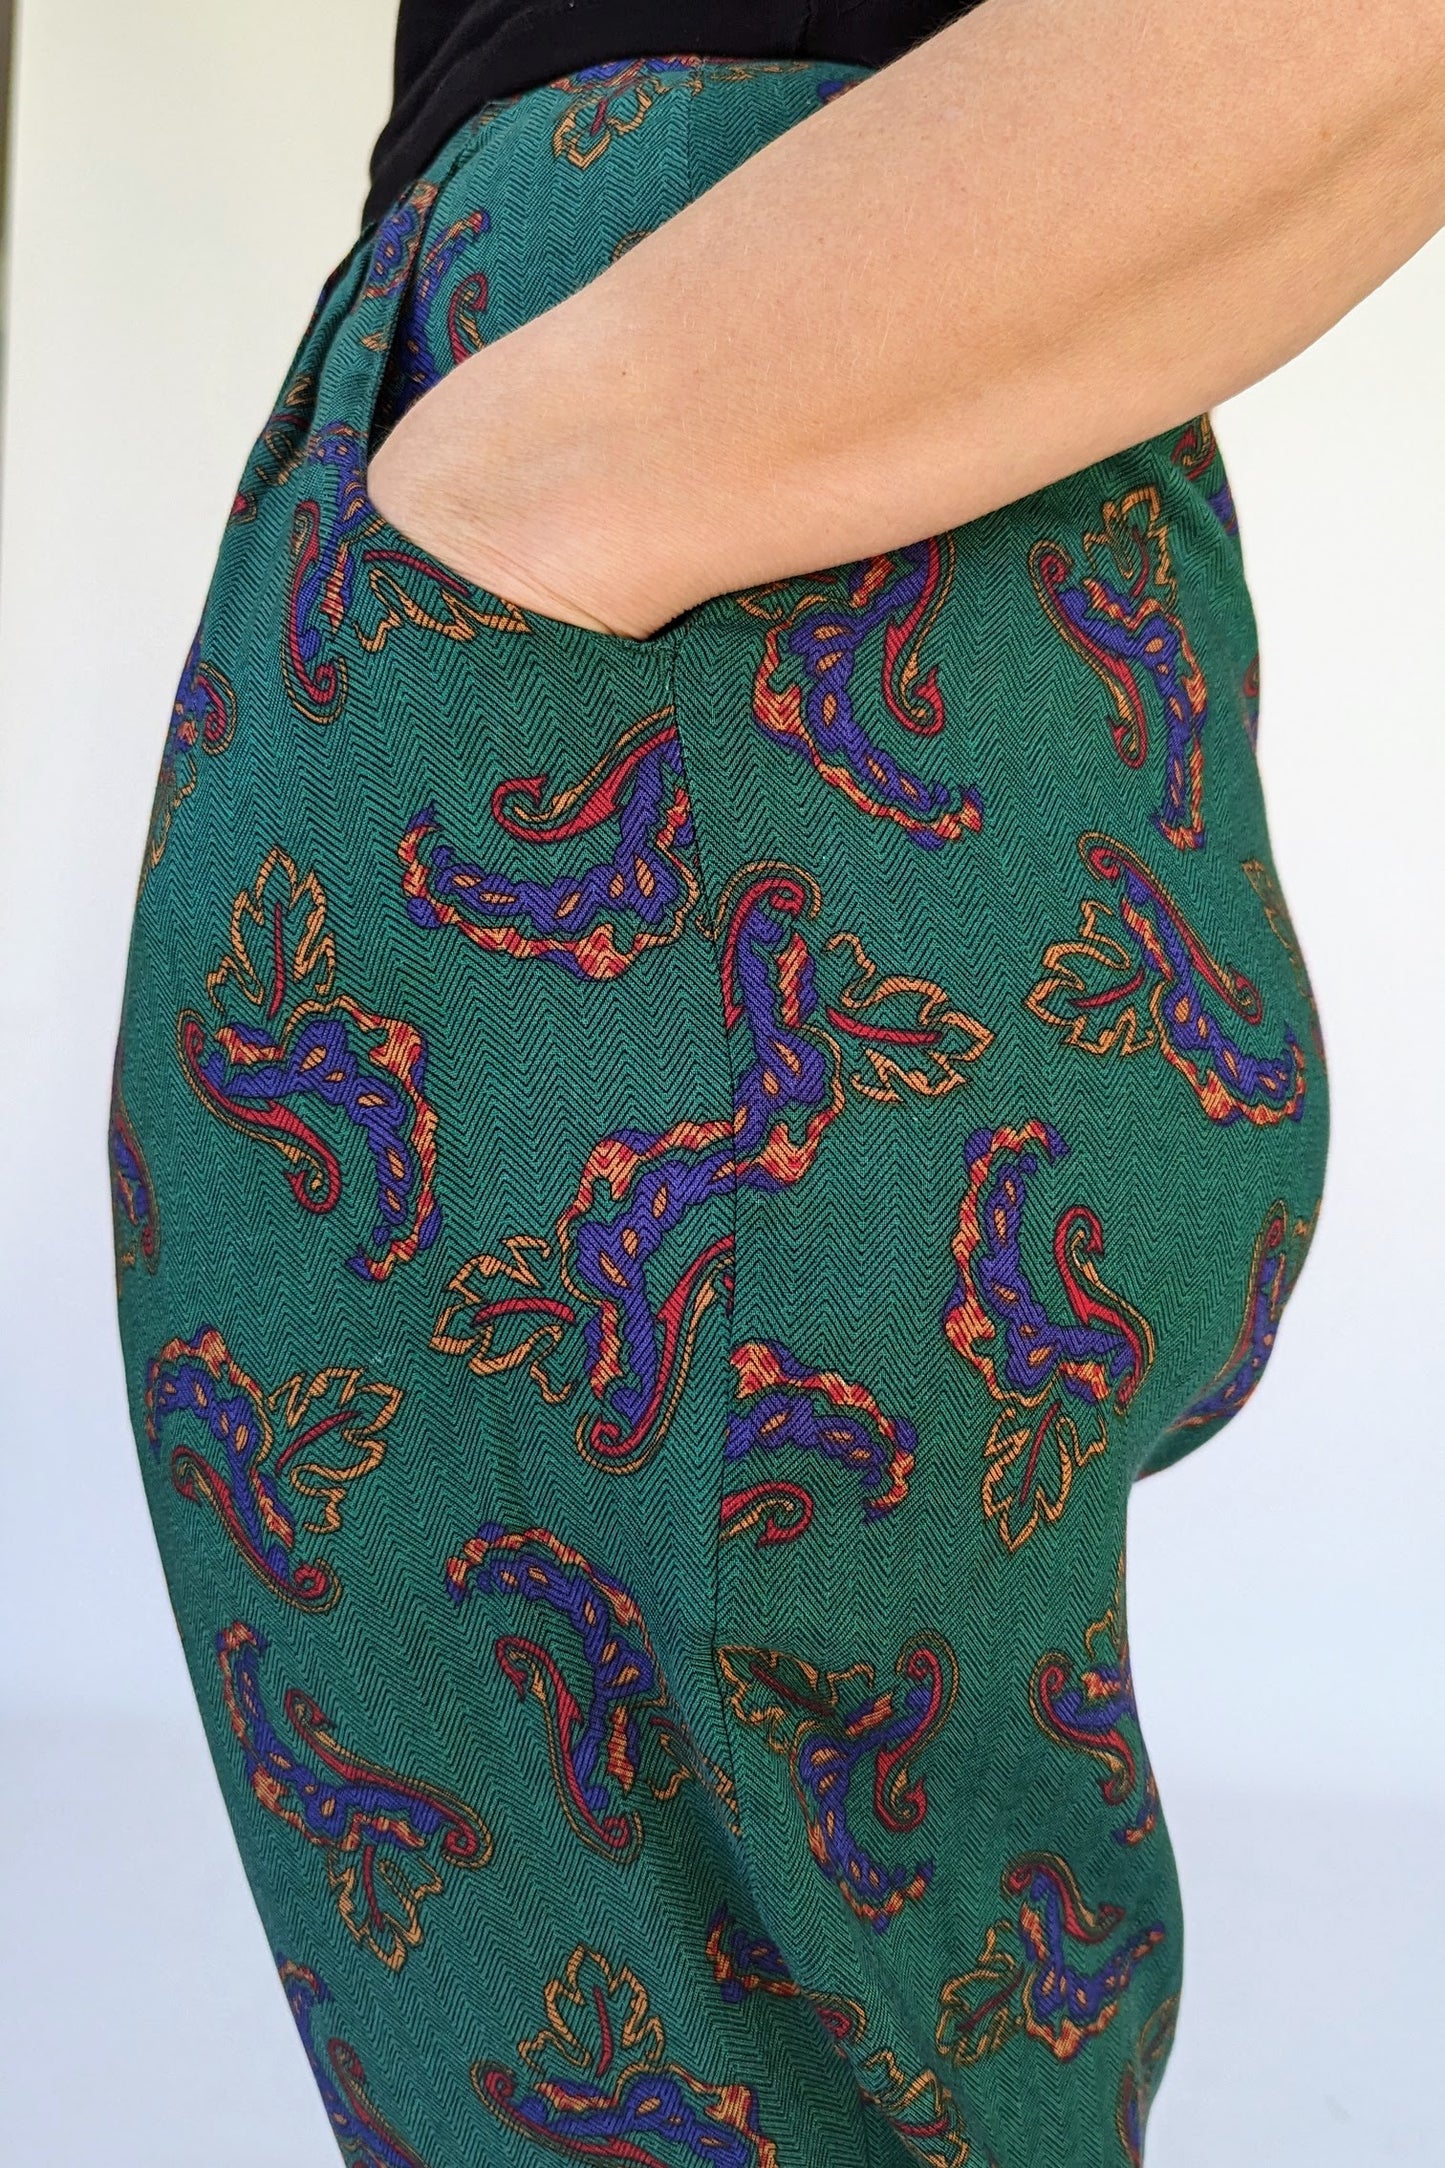 green trousers with paisley pattern of red, blue and orange